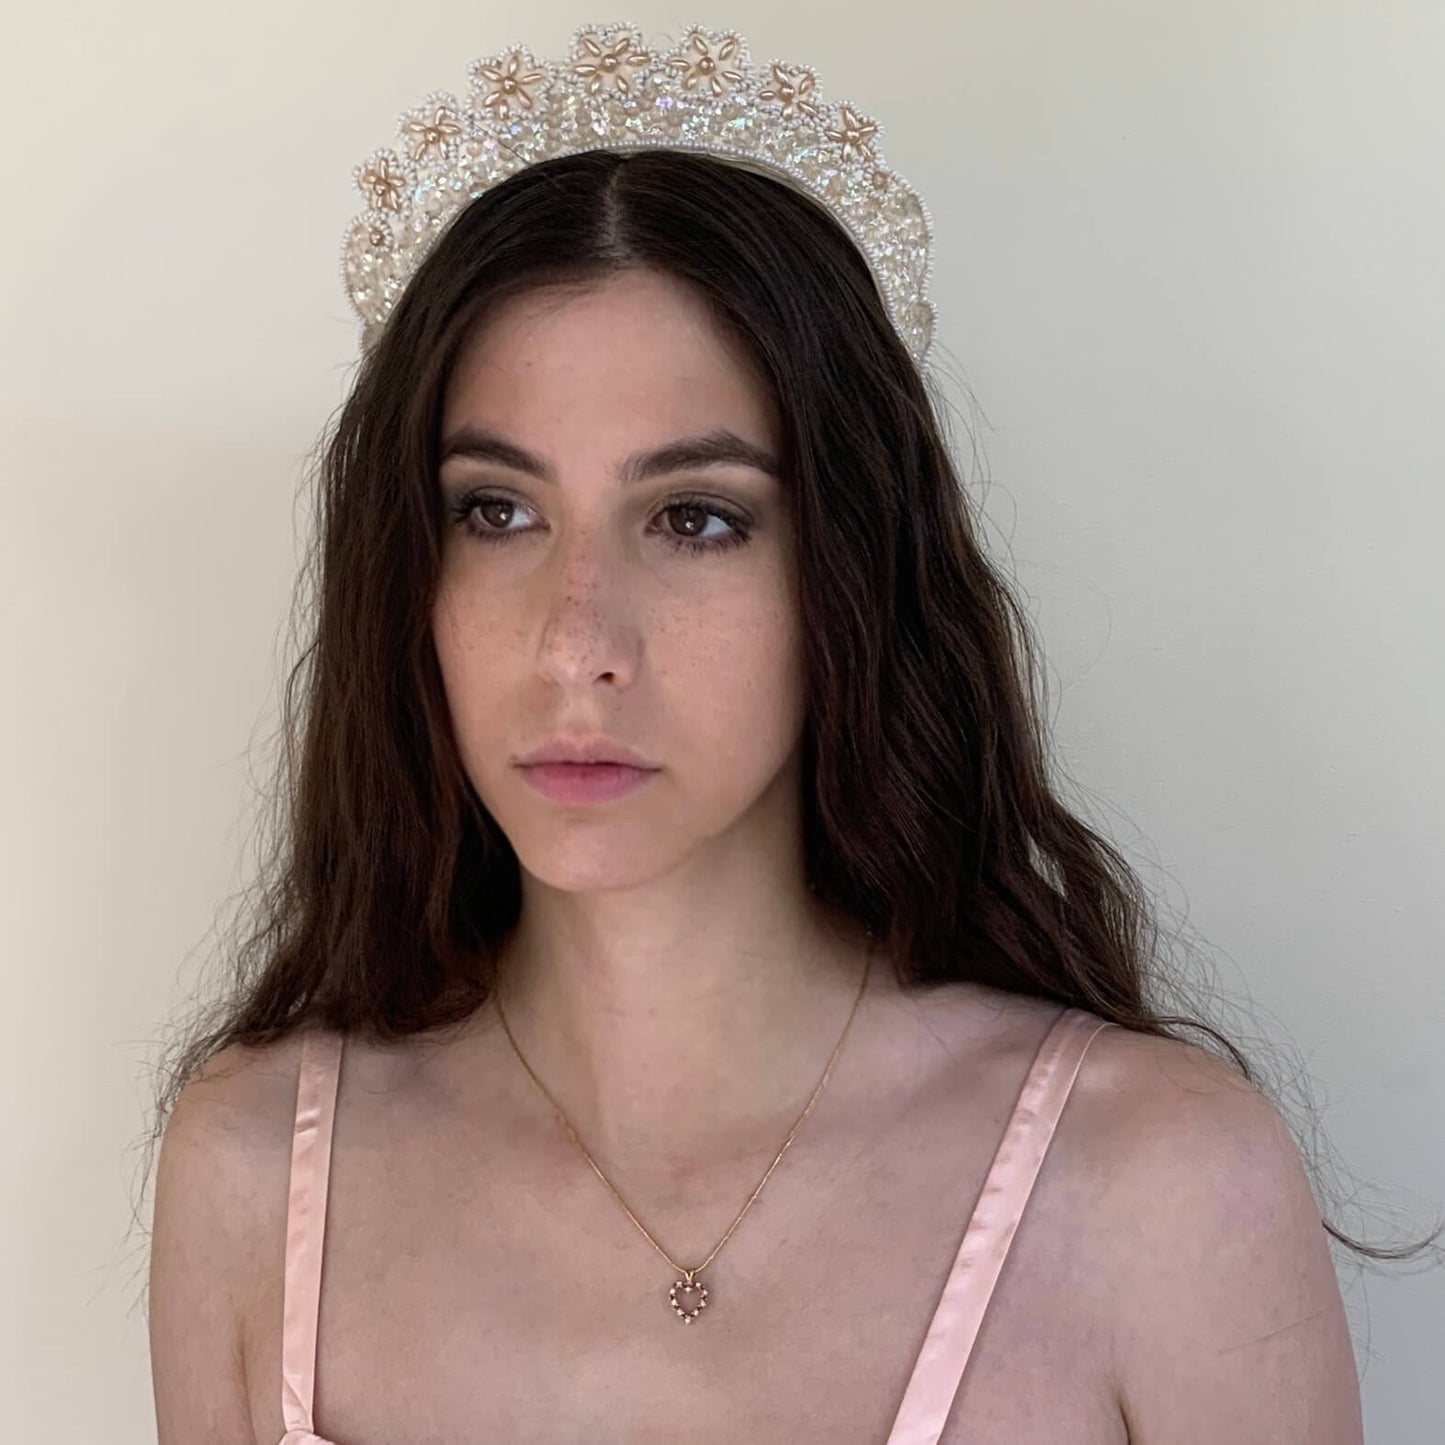 1930s vintage bridal crown with pearlescent flowers on model in front of a white background